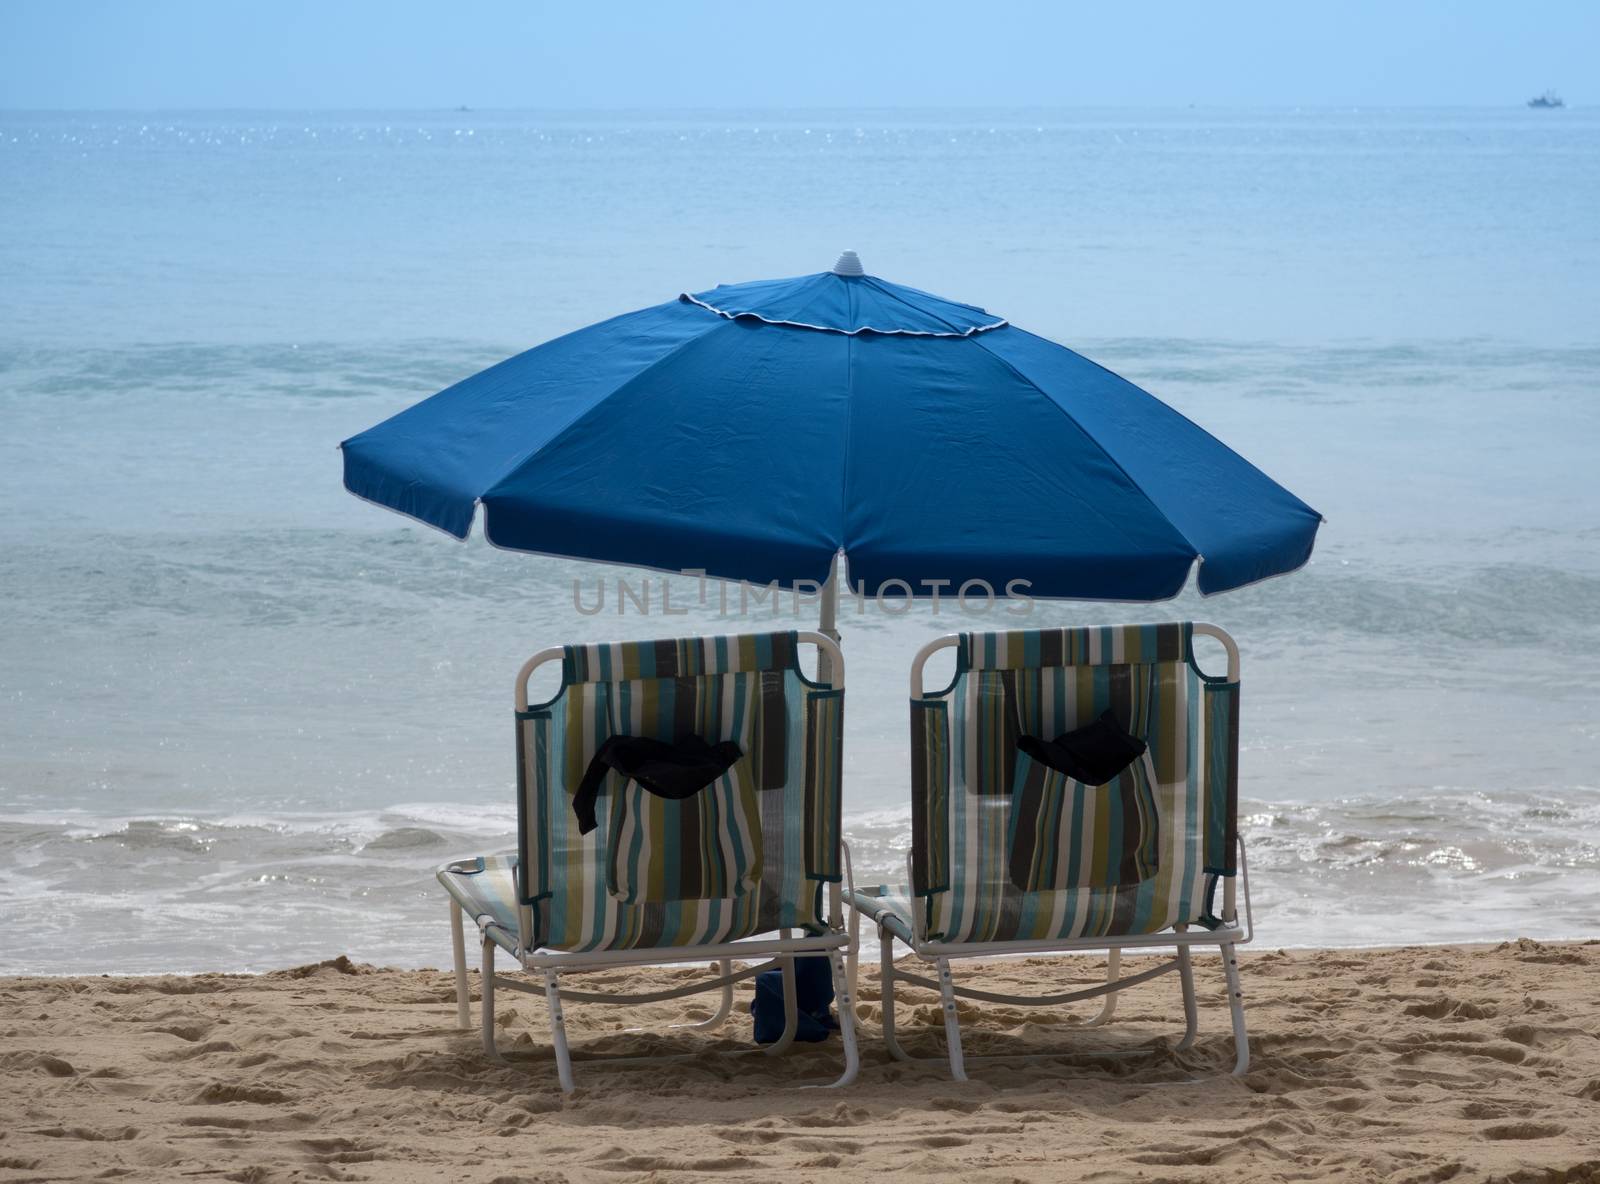 Empty beach chairs with umbrellas on sandy beach of Pacific Ocea by tab1962